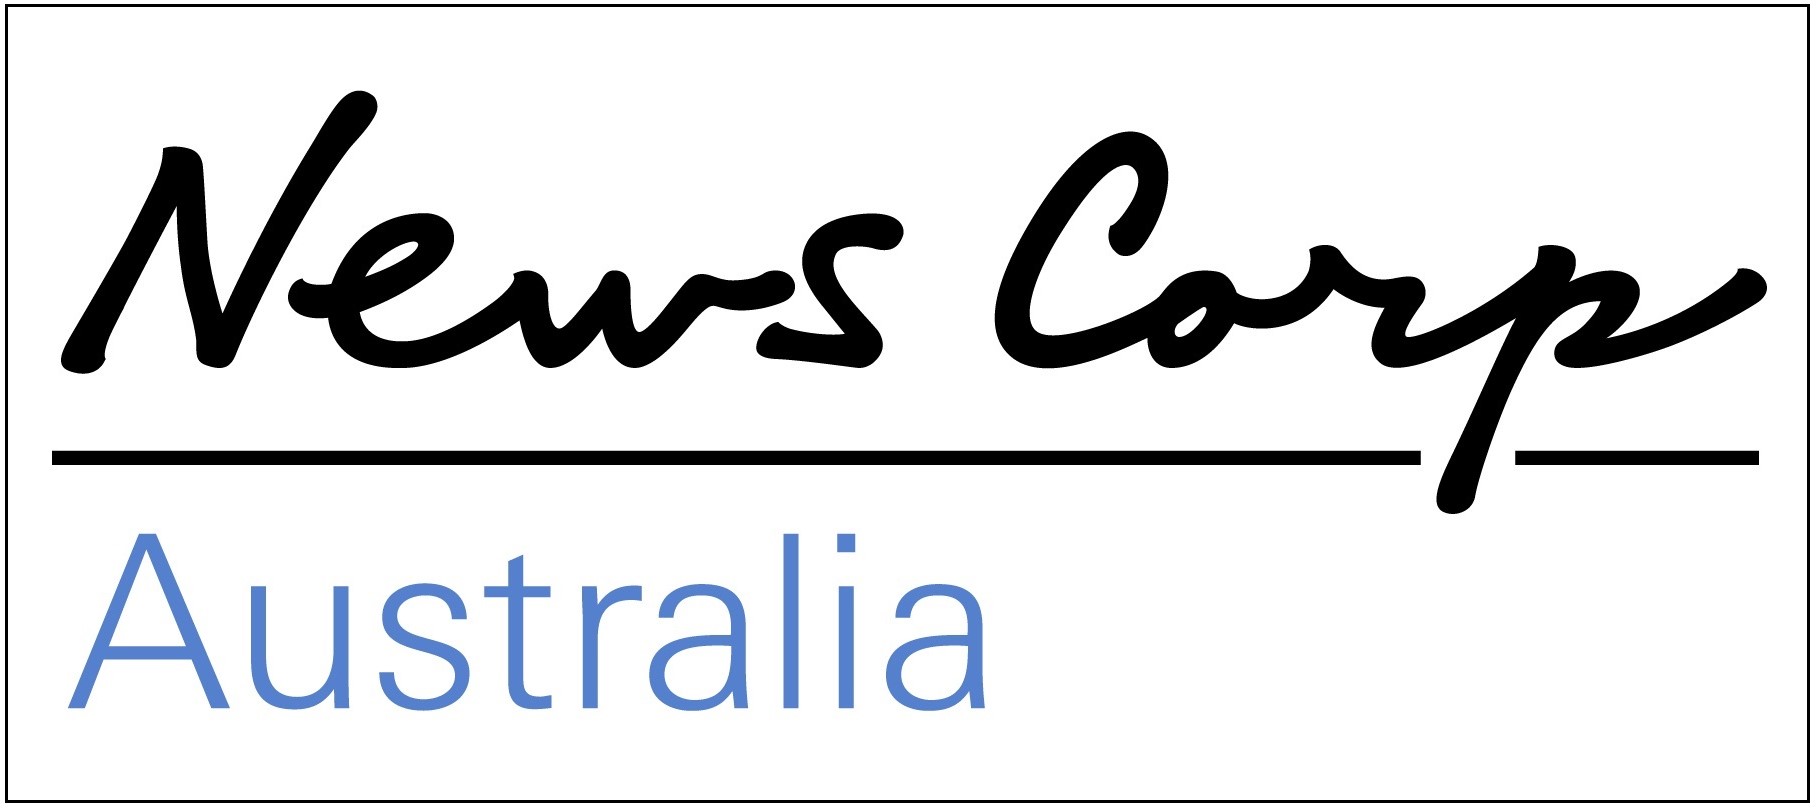 News Corp Australia lifting its game on primary distribution support